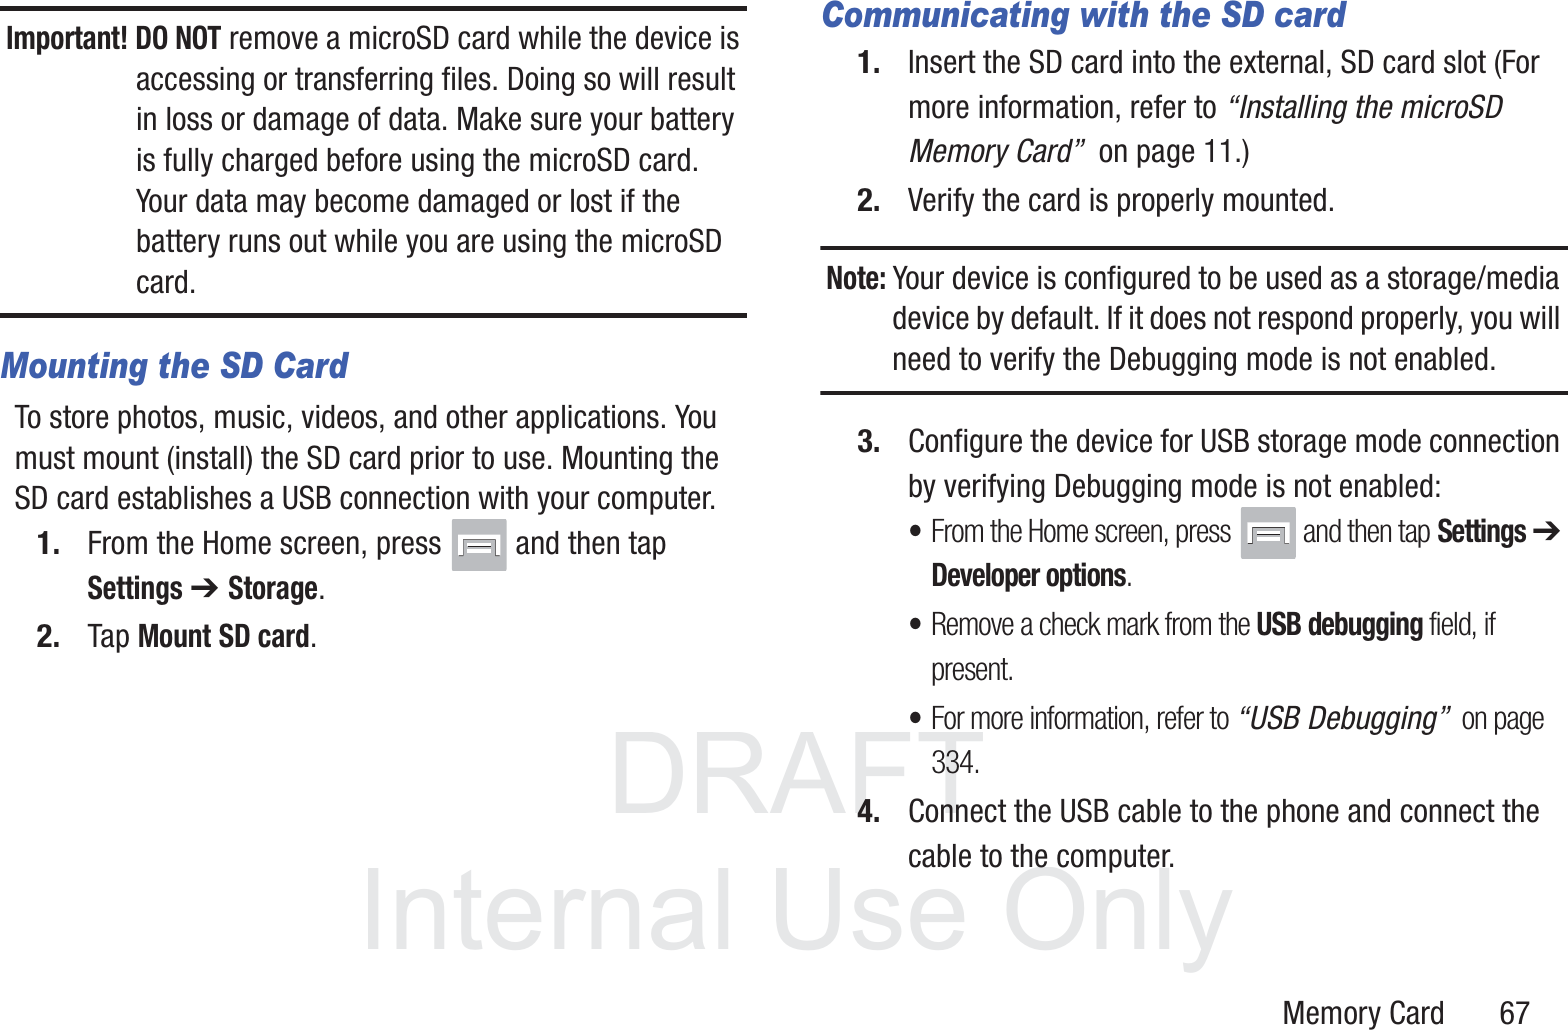 DRAFT InternalUse OnlyMemory Card       67Important! DO NOT remove a microSD card while the device is accessing or transferring files. Doing so will result in loss or damage of data. Make sure your battery is fully charged before using the microSD card. Your data may become damaged or lost if the battery runs out while you are using the microSD card.Mounting the SD CardTo store photos, music, videos, and other applications. You must mount (install) the SD card prior to use. Mounting the SD card establishes a USB connection with your computer.1. From the Home screen, press   and then tap Settings ➔ Storage.2. Tap Mount SD card.Communicating with the SD card1. Insert the SD card into the external, SD card slot (For more information, refer to “Installing the microSD Memory Card”  on page 11.)2. Verify the card is properly mounted.Note: Your device is configured to be used as a storage/media device by default. If it does not respond properly, you will need to verify the Debugging mode is not enabled.3. Configure the device for USB storage mode connection by verifying Debugging mode is not enabled: •From the Home screen, press  and then tap Settings ➔ Developer options.•Remove a check mark from the USB debugging field, if present.•For more information, refer to “USB Debugging”  on page 334.4. Connect the USB cable to the phone and connect the cable to the computer.